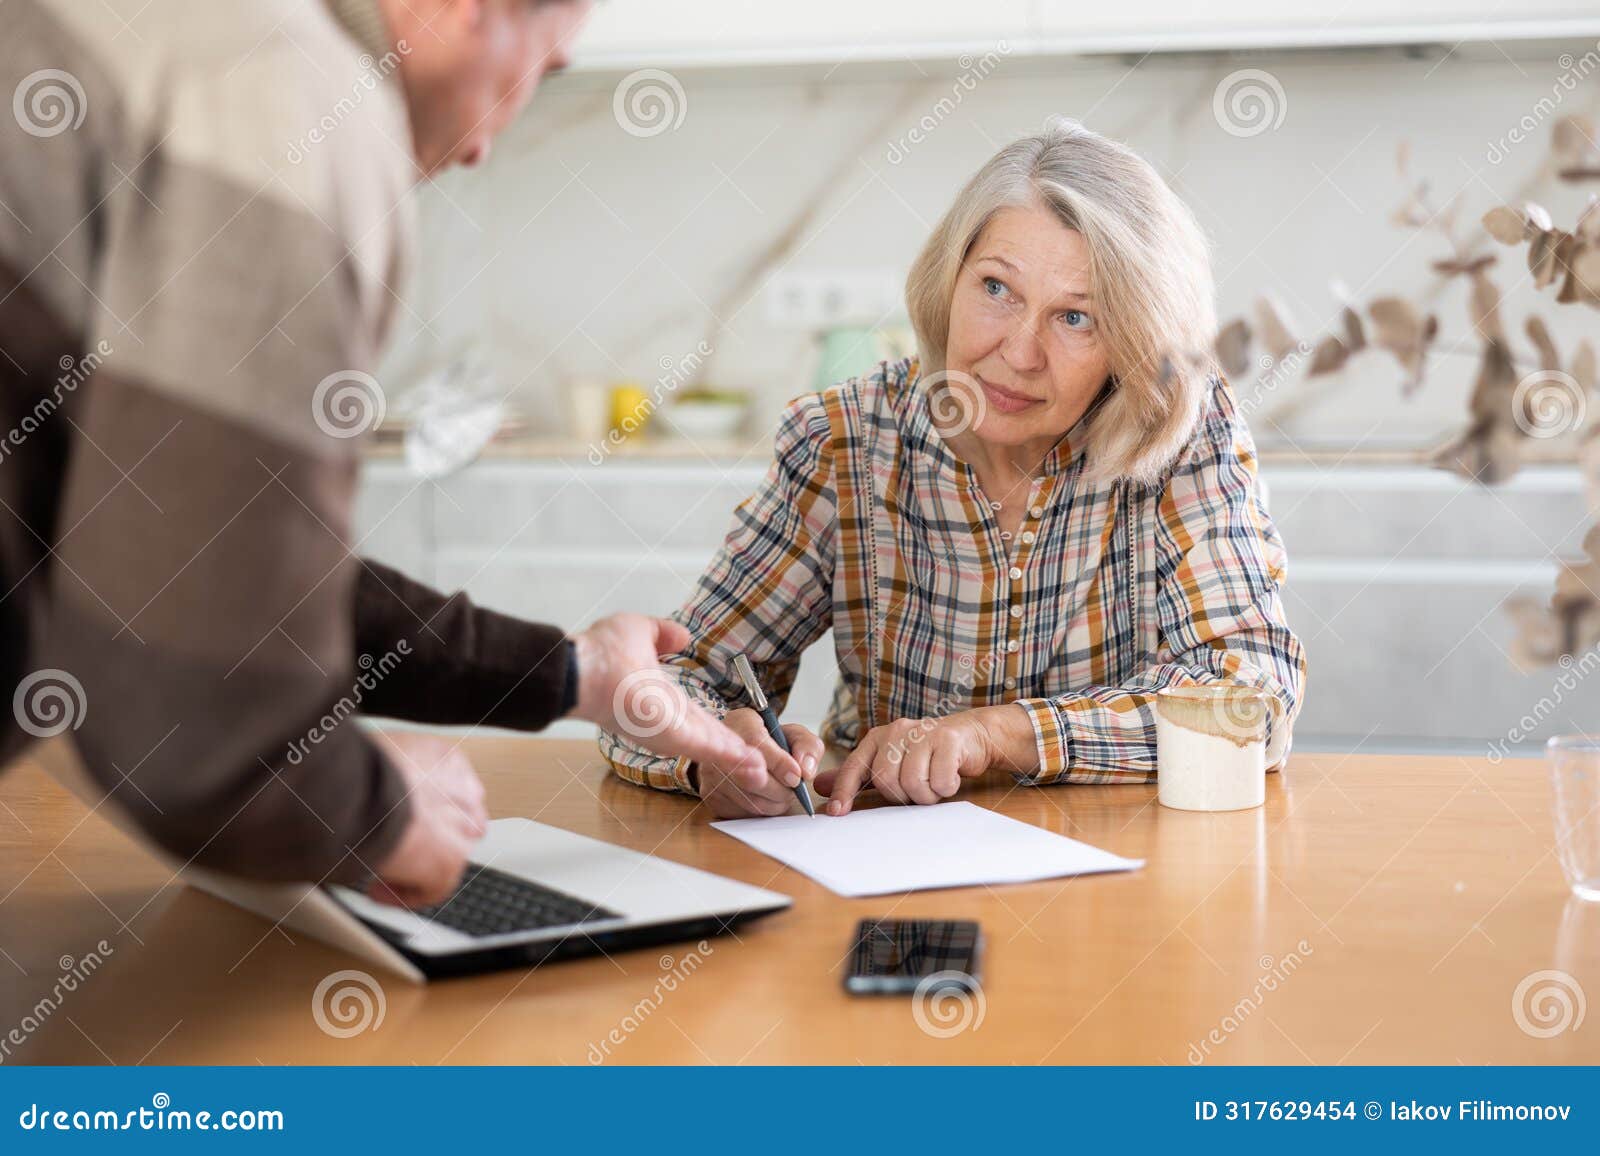 old woman considering offer from agent